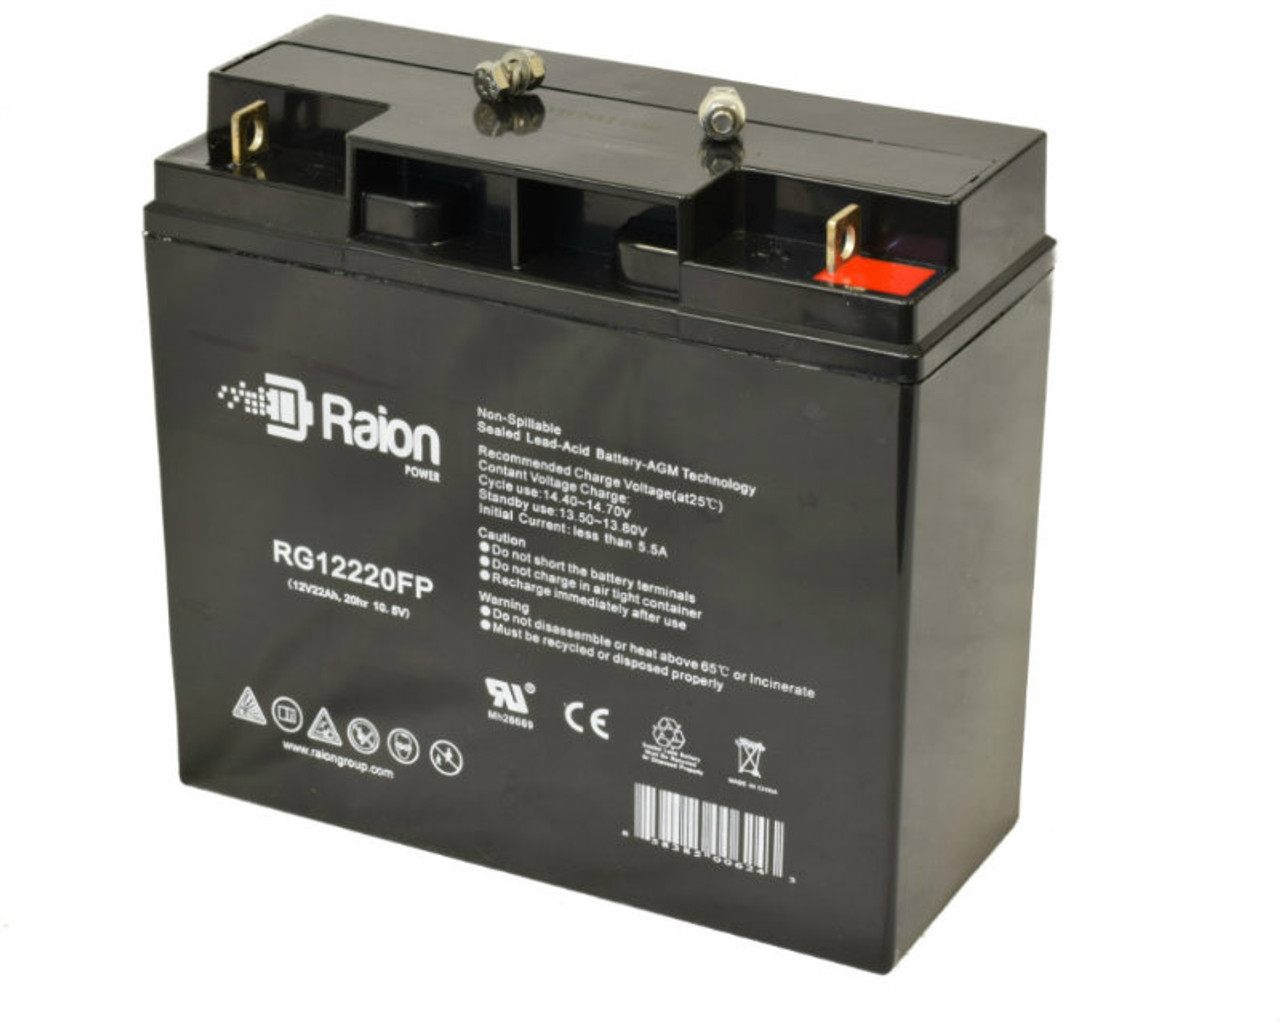 Raion Power Replacement RG12220FP Battery for Black & Decker 242606 Lawn Mower